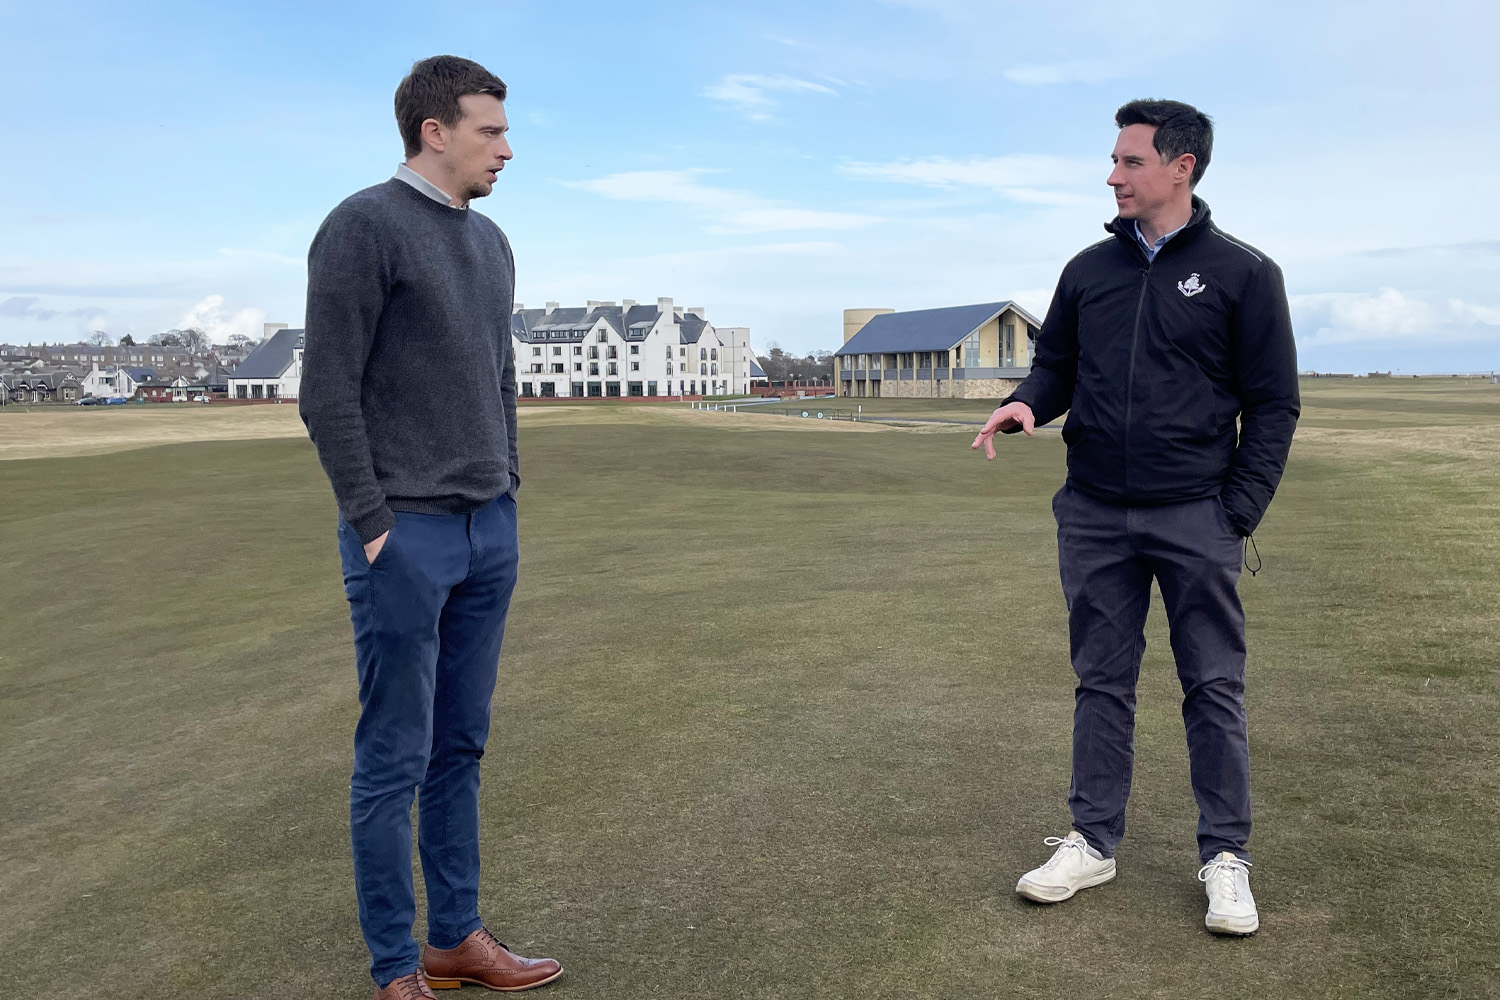 A new Abertay study shows the positive influencing power of a major golfing event